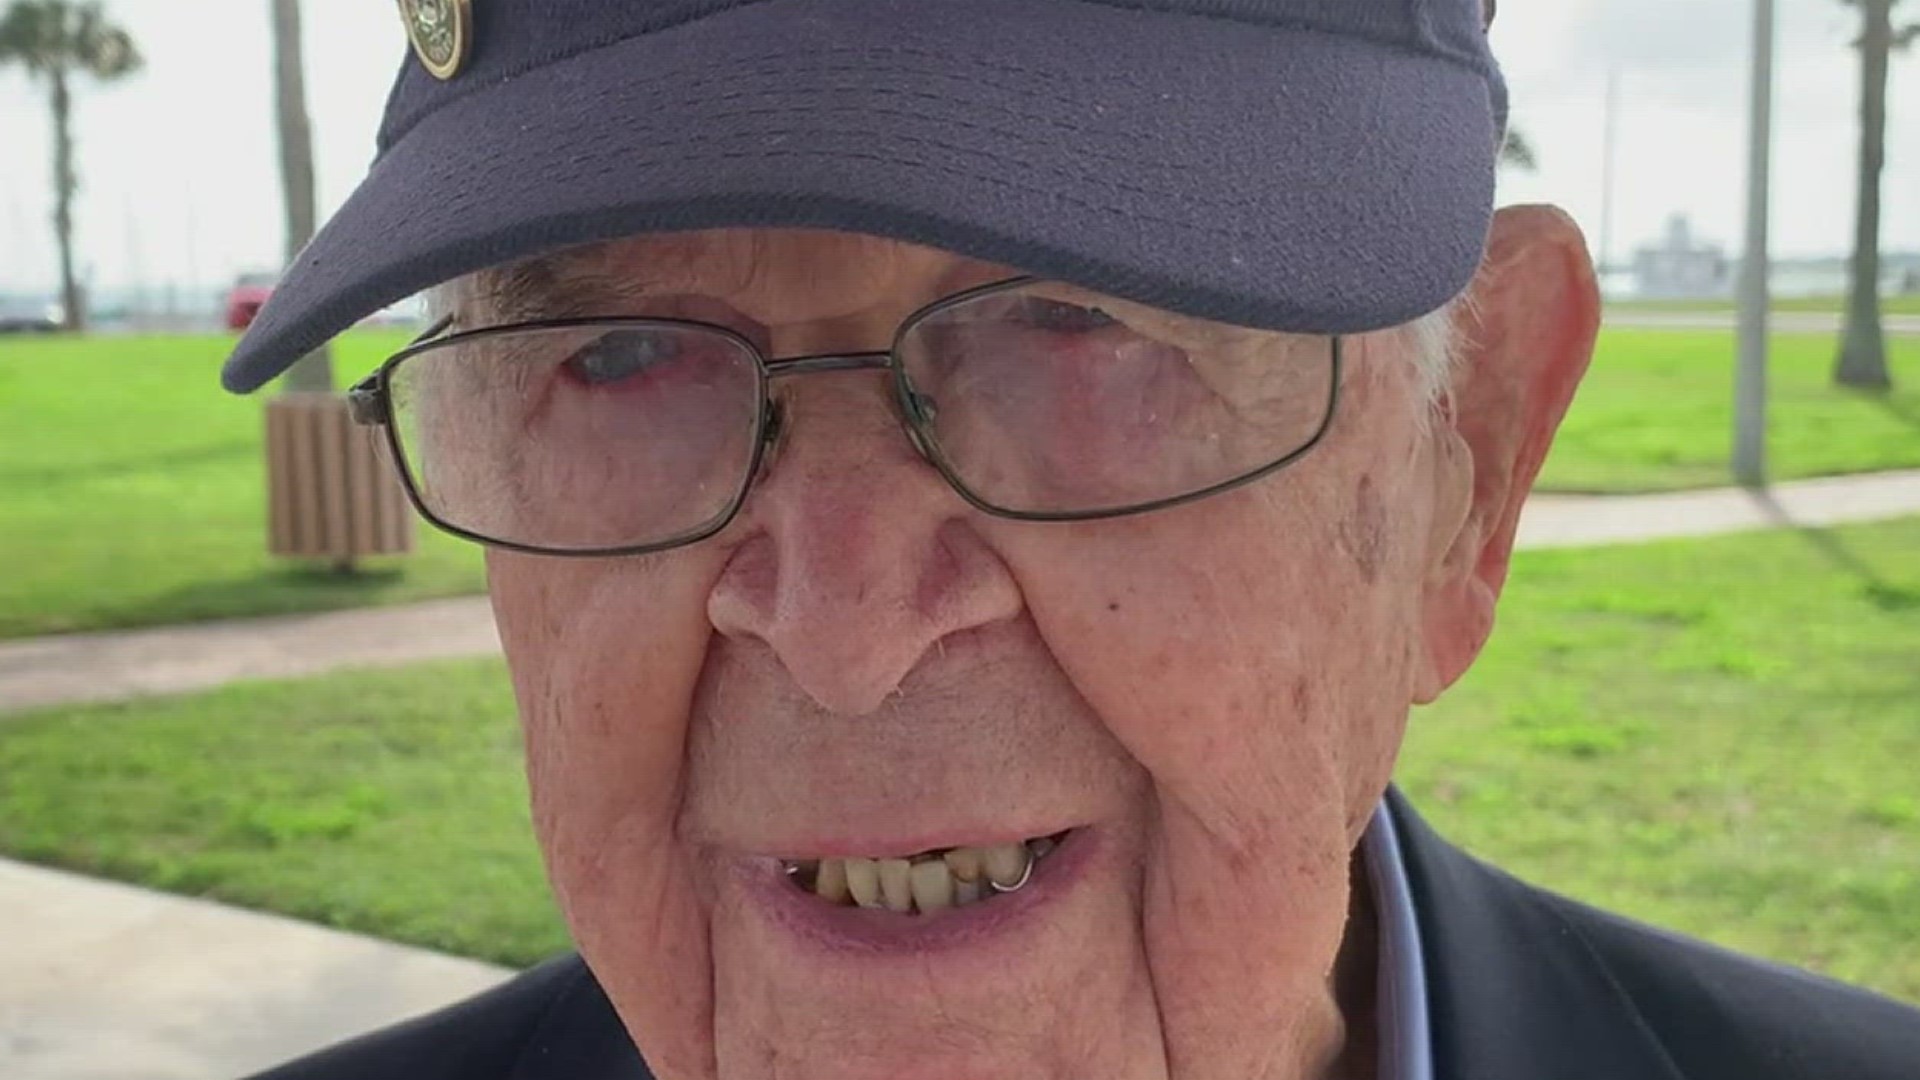 Bob Batterson passed away over the weekend at the age of 102.